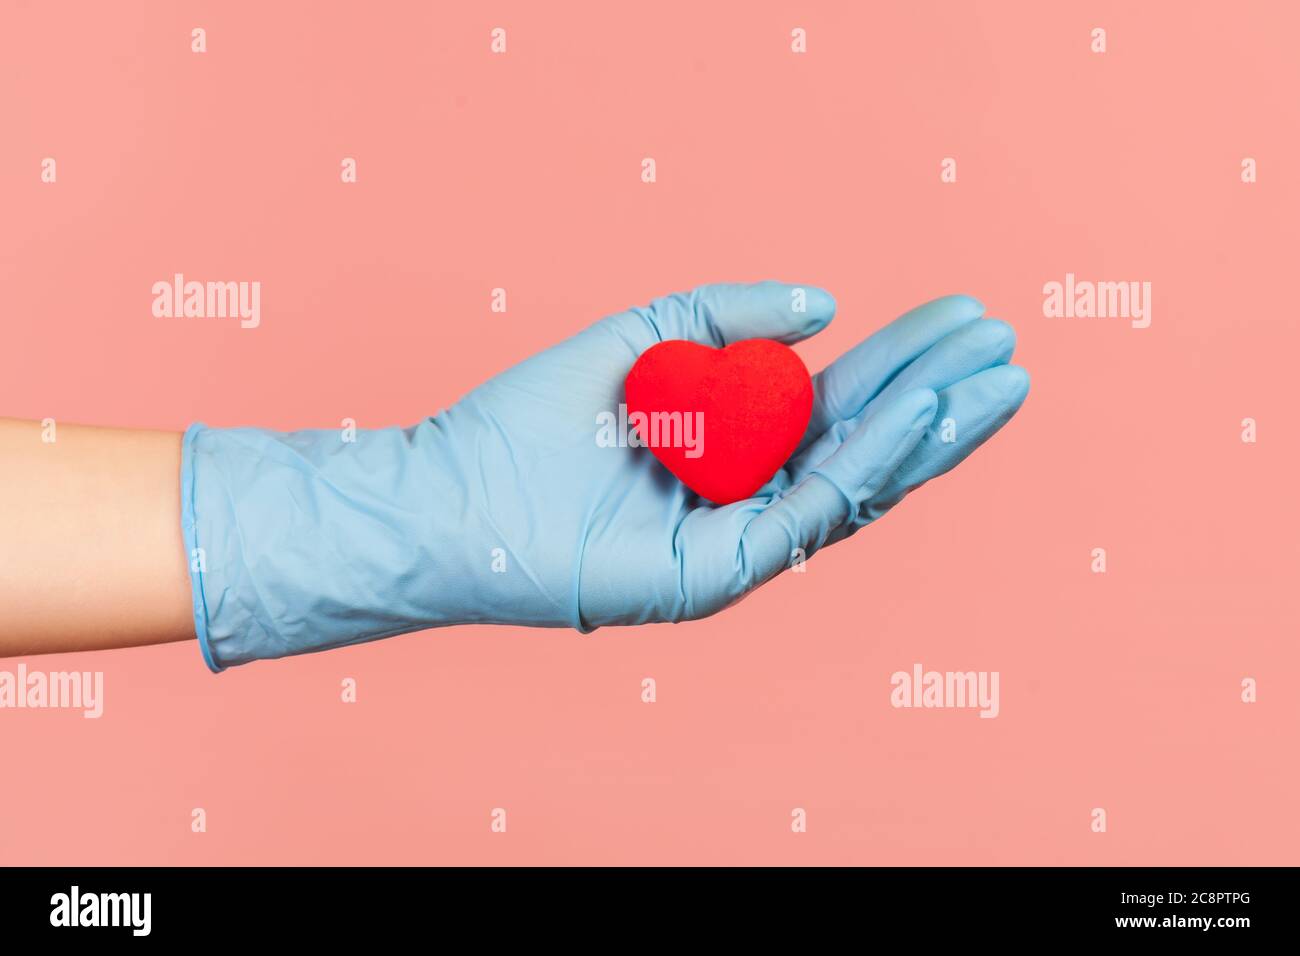 Profile side view closeup of human hand in blue surgical gloves holding small red heart shape in hand. indoor, studio shot, isolated on pink backgroun Stock Photo